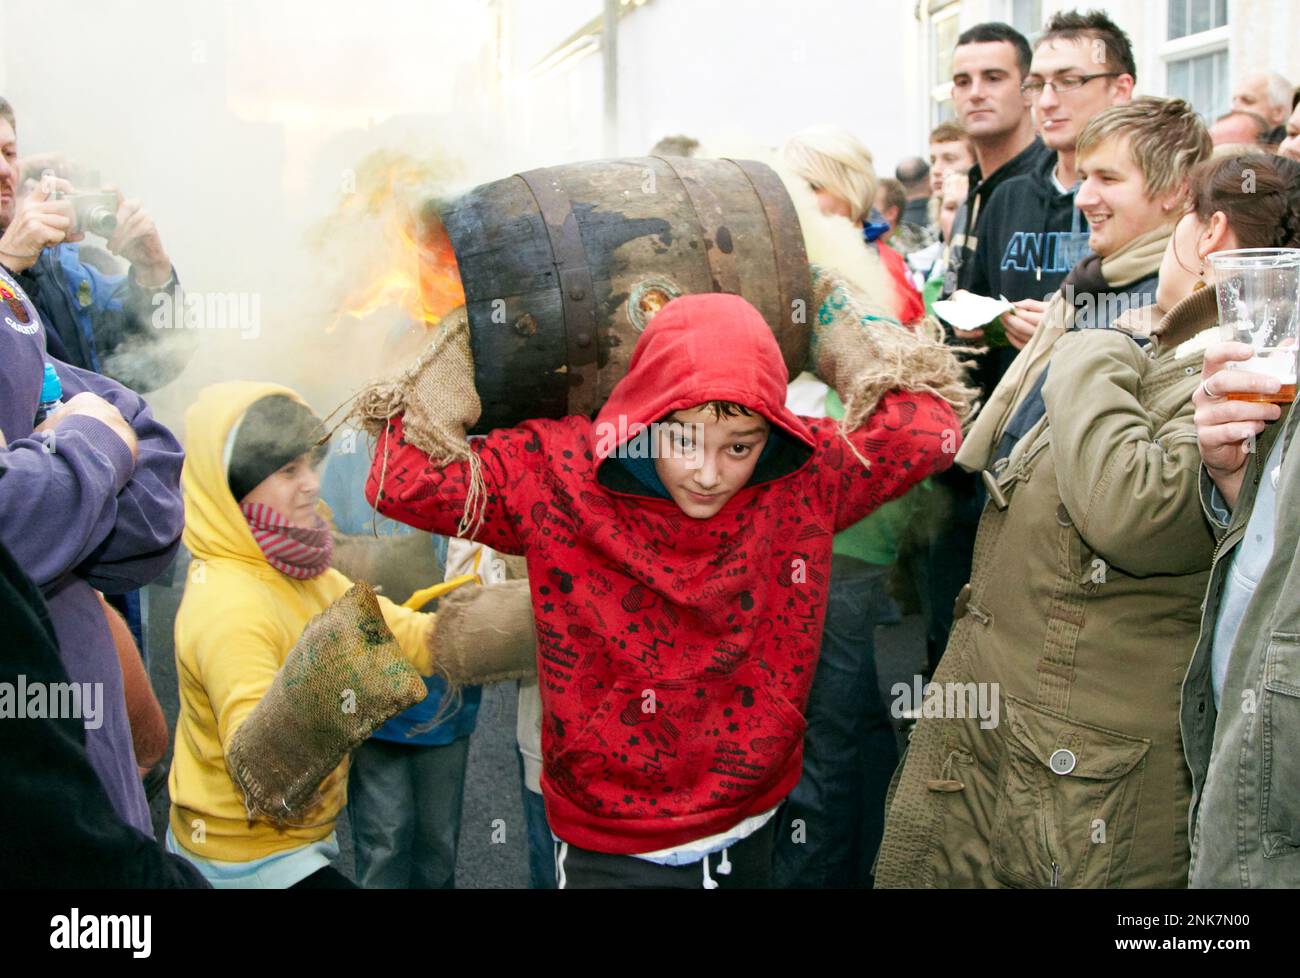 Young Boy Carrying A Burning Tar Barrel Ottery St Mary Devon UK Europe Stock Photo